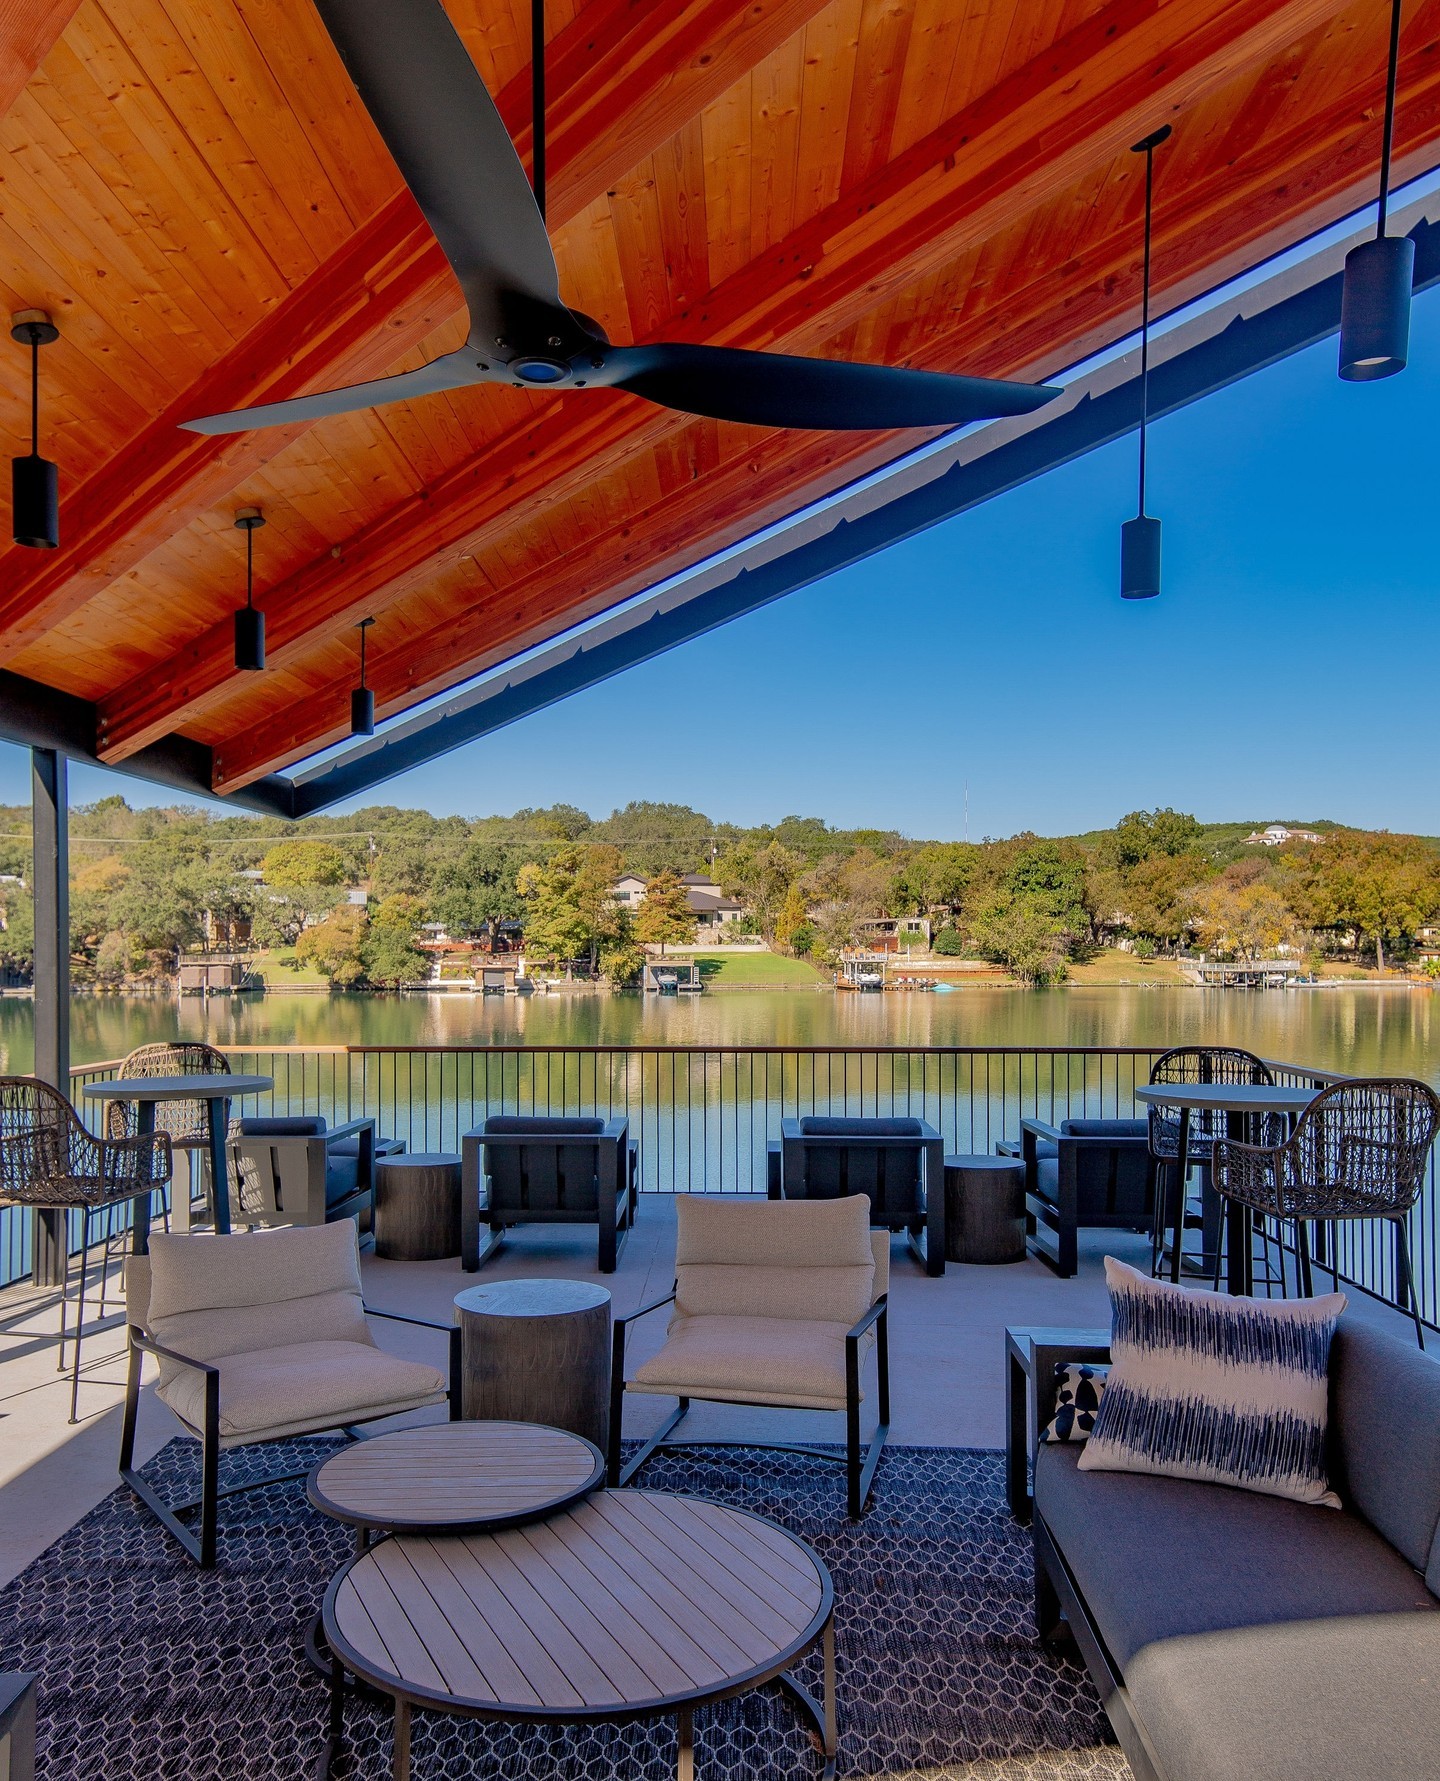 The star of this property might be this gorgeous space of above the boat dock. ⁠
@breckstudio⁠
@highcamphome 
⁠
⁠
⁠